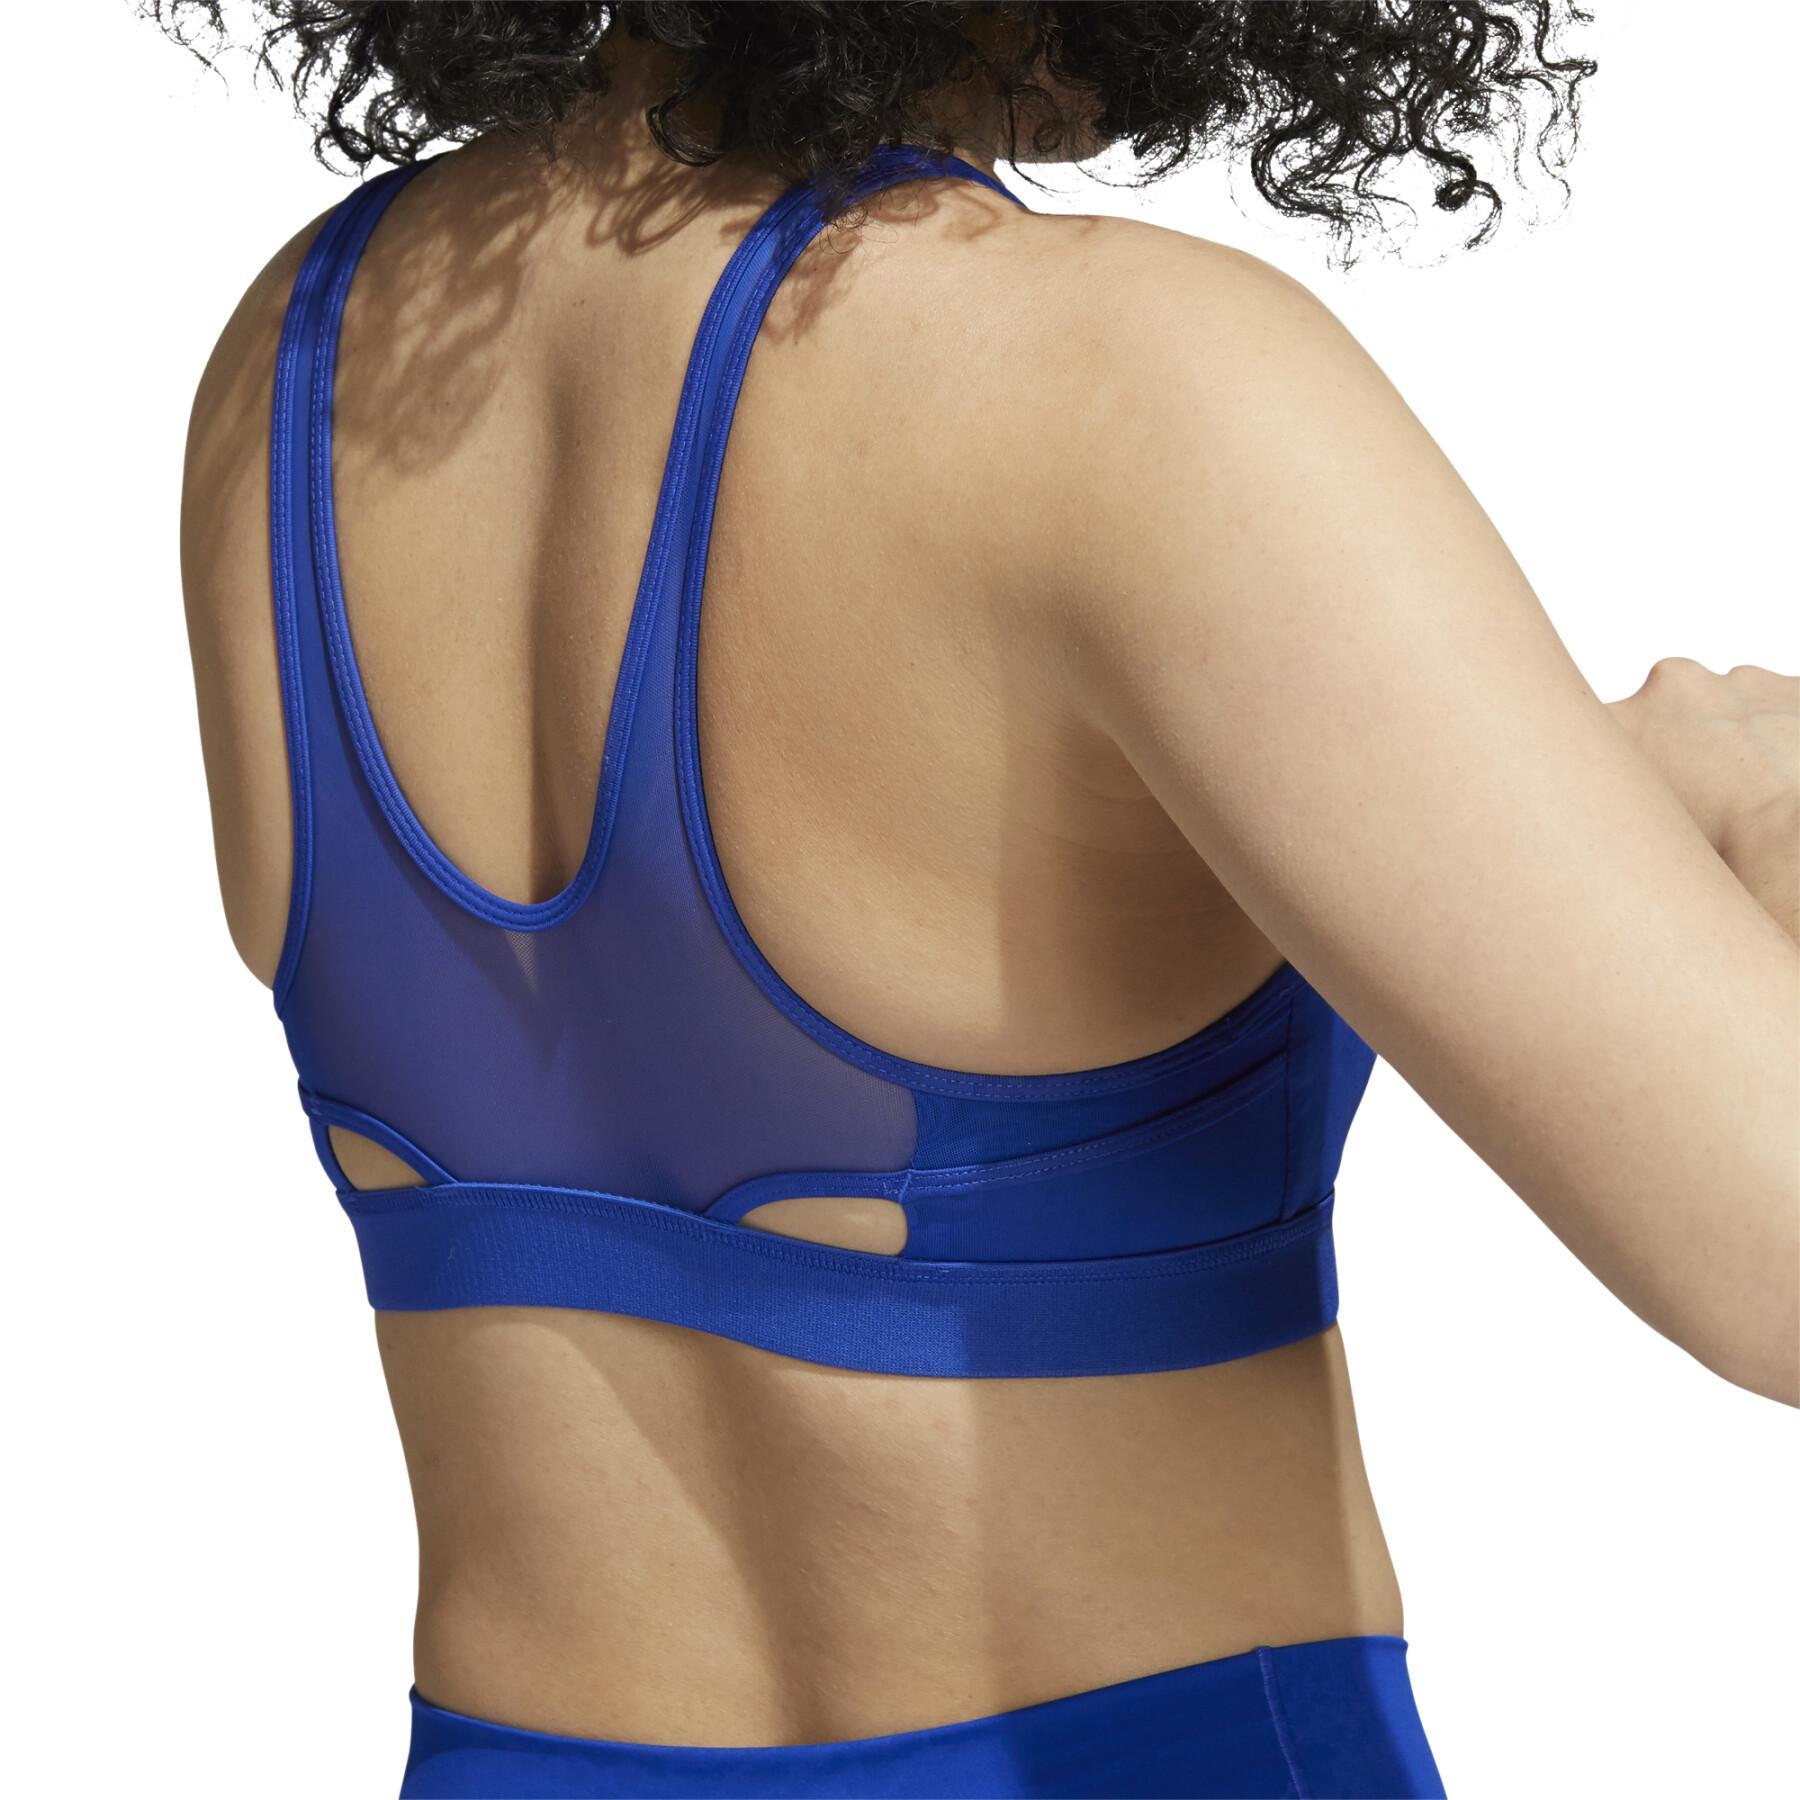 Brassière femme adidas Believe This Medium-Support Lace Camo Workout